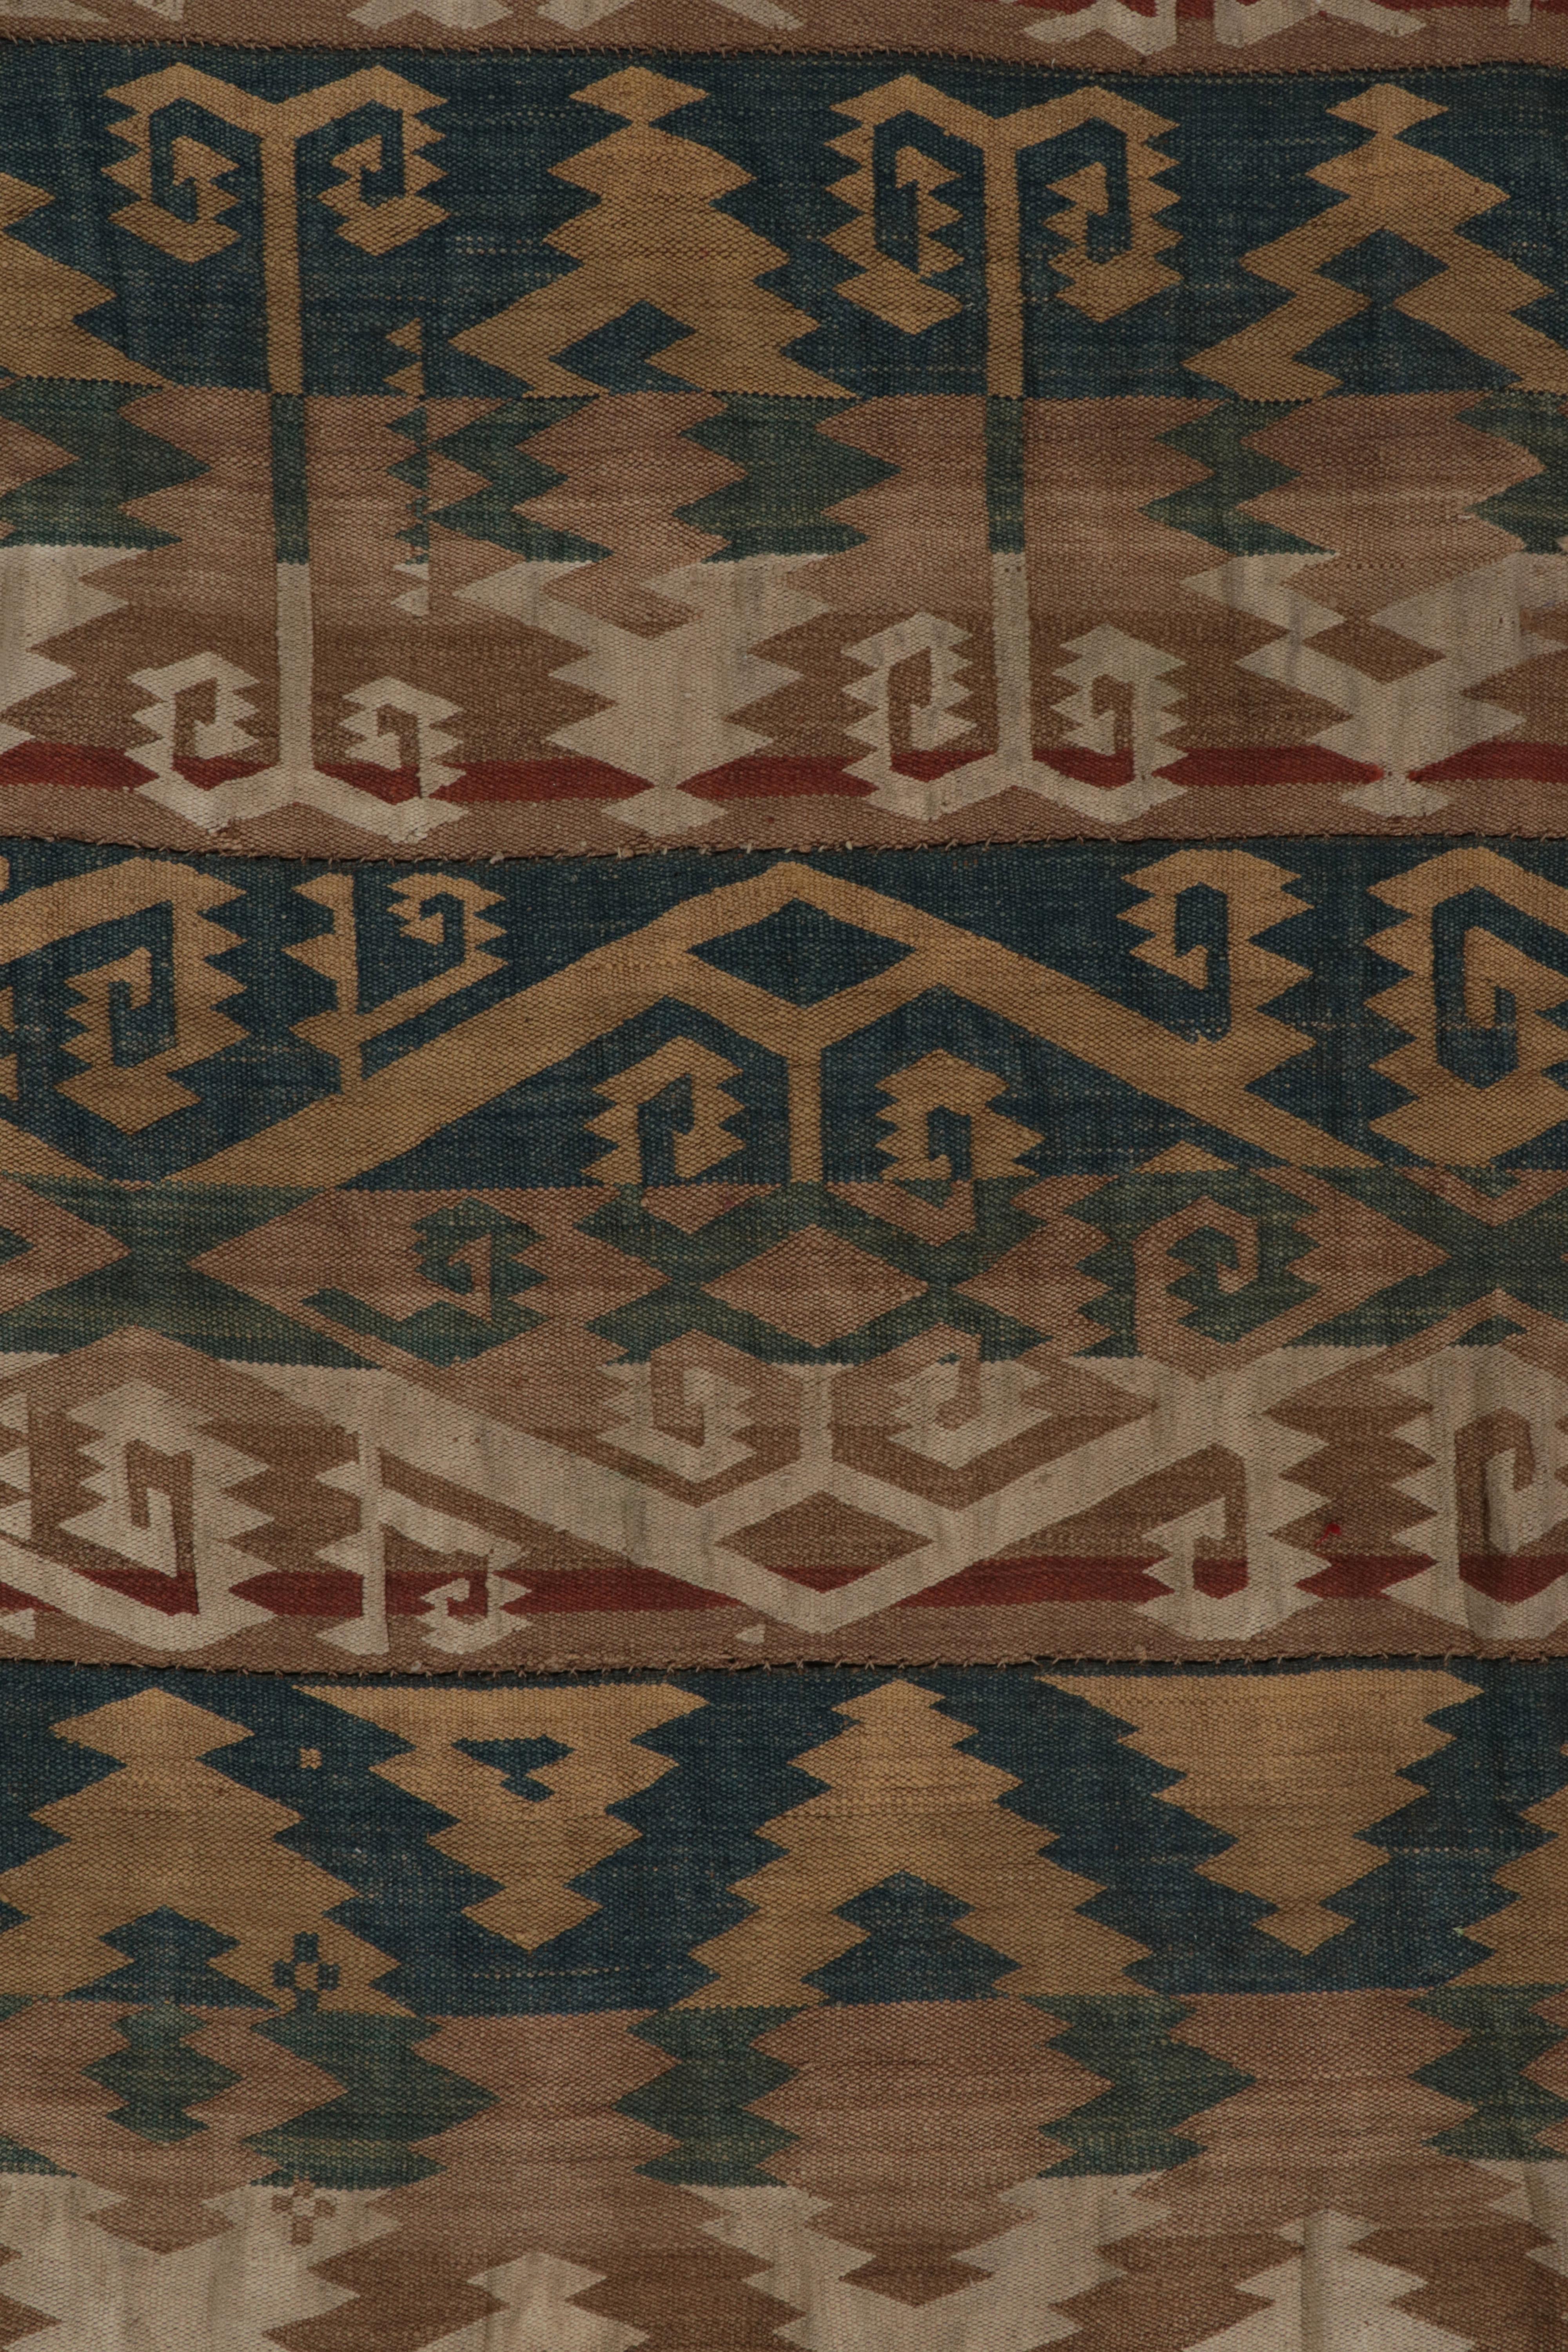 Vintage Kilim rug in Brown, Blue, Green Tribal Geometric Pattern by Rug & Kilim In Good Condition For Sale In Long Island City, NY